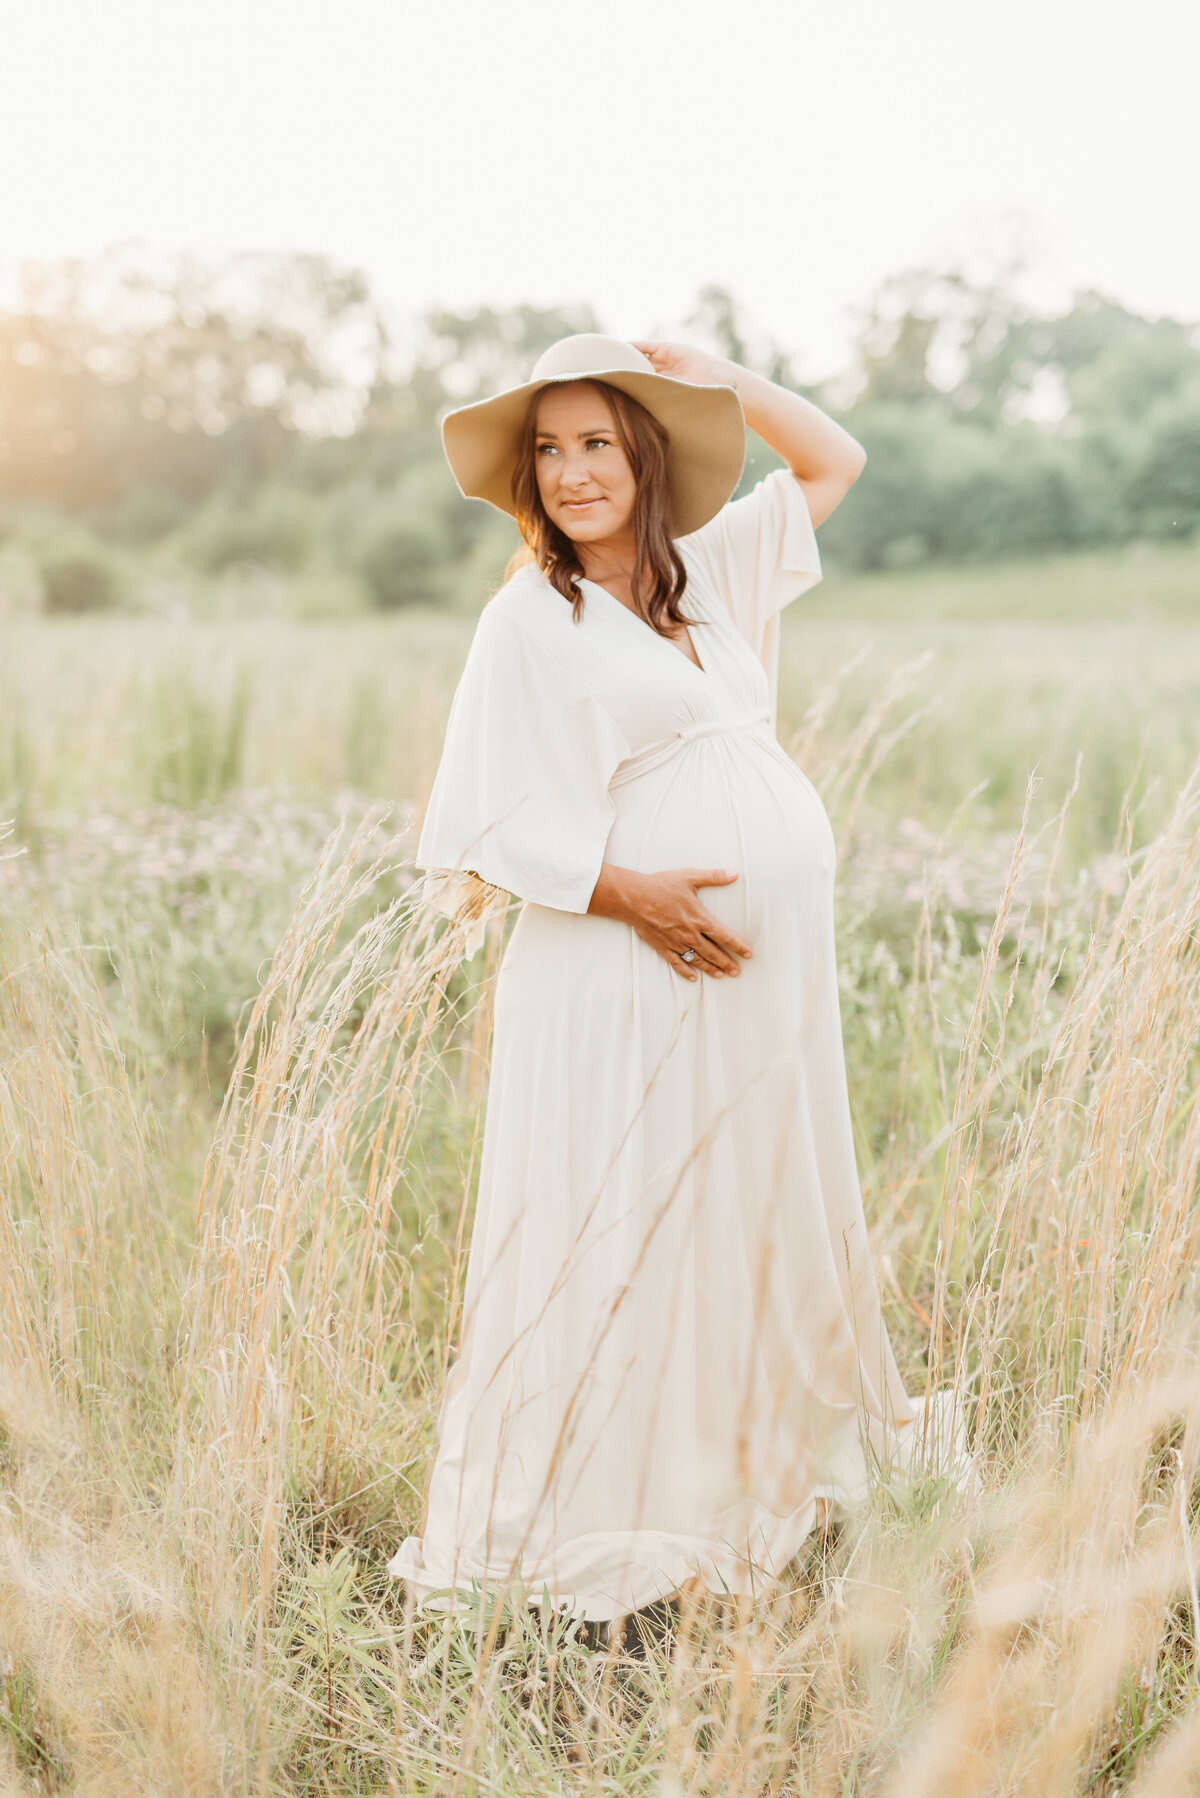 Belleville IL Maternity Session Outdoor Sunset